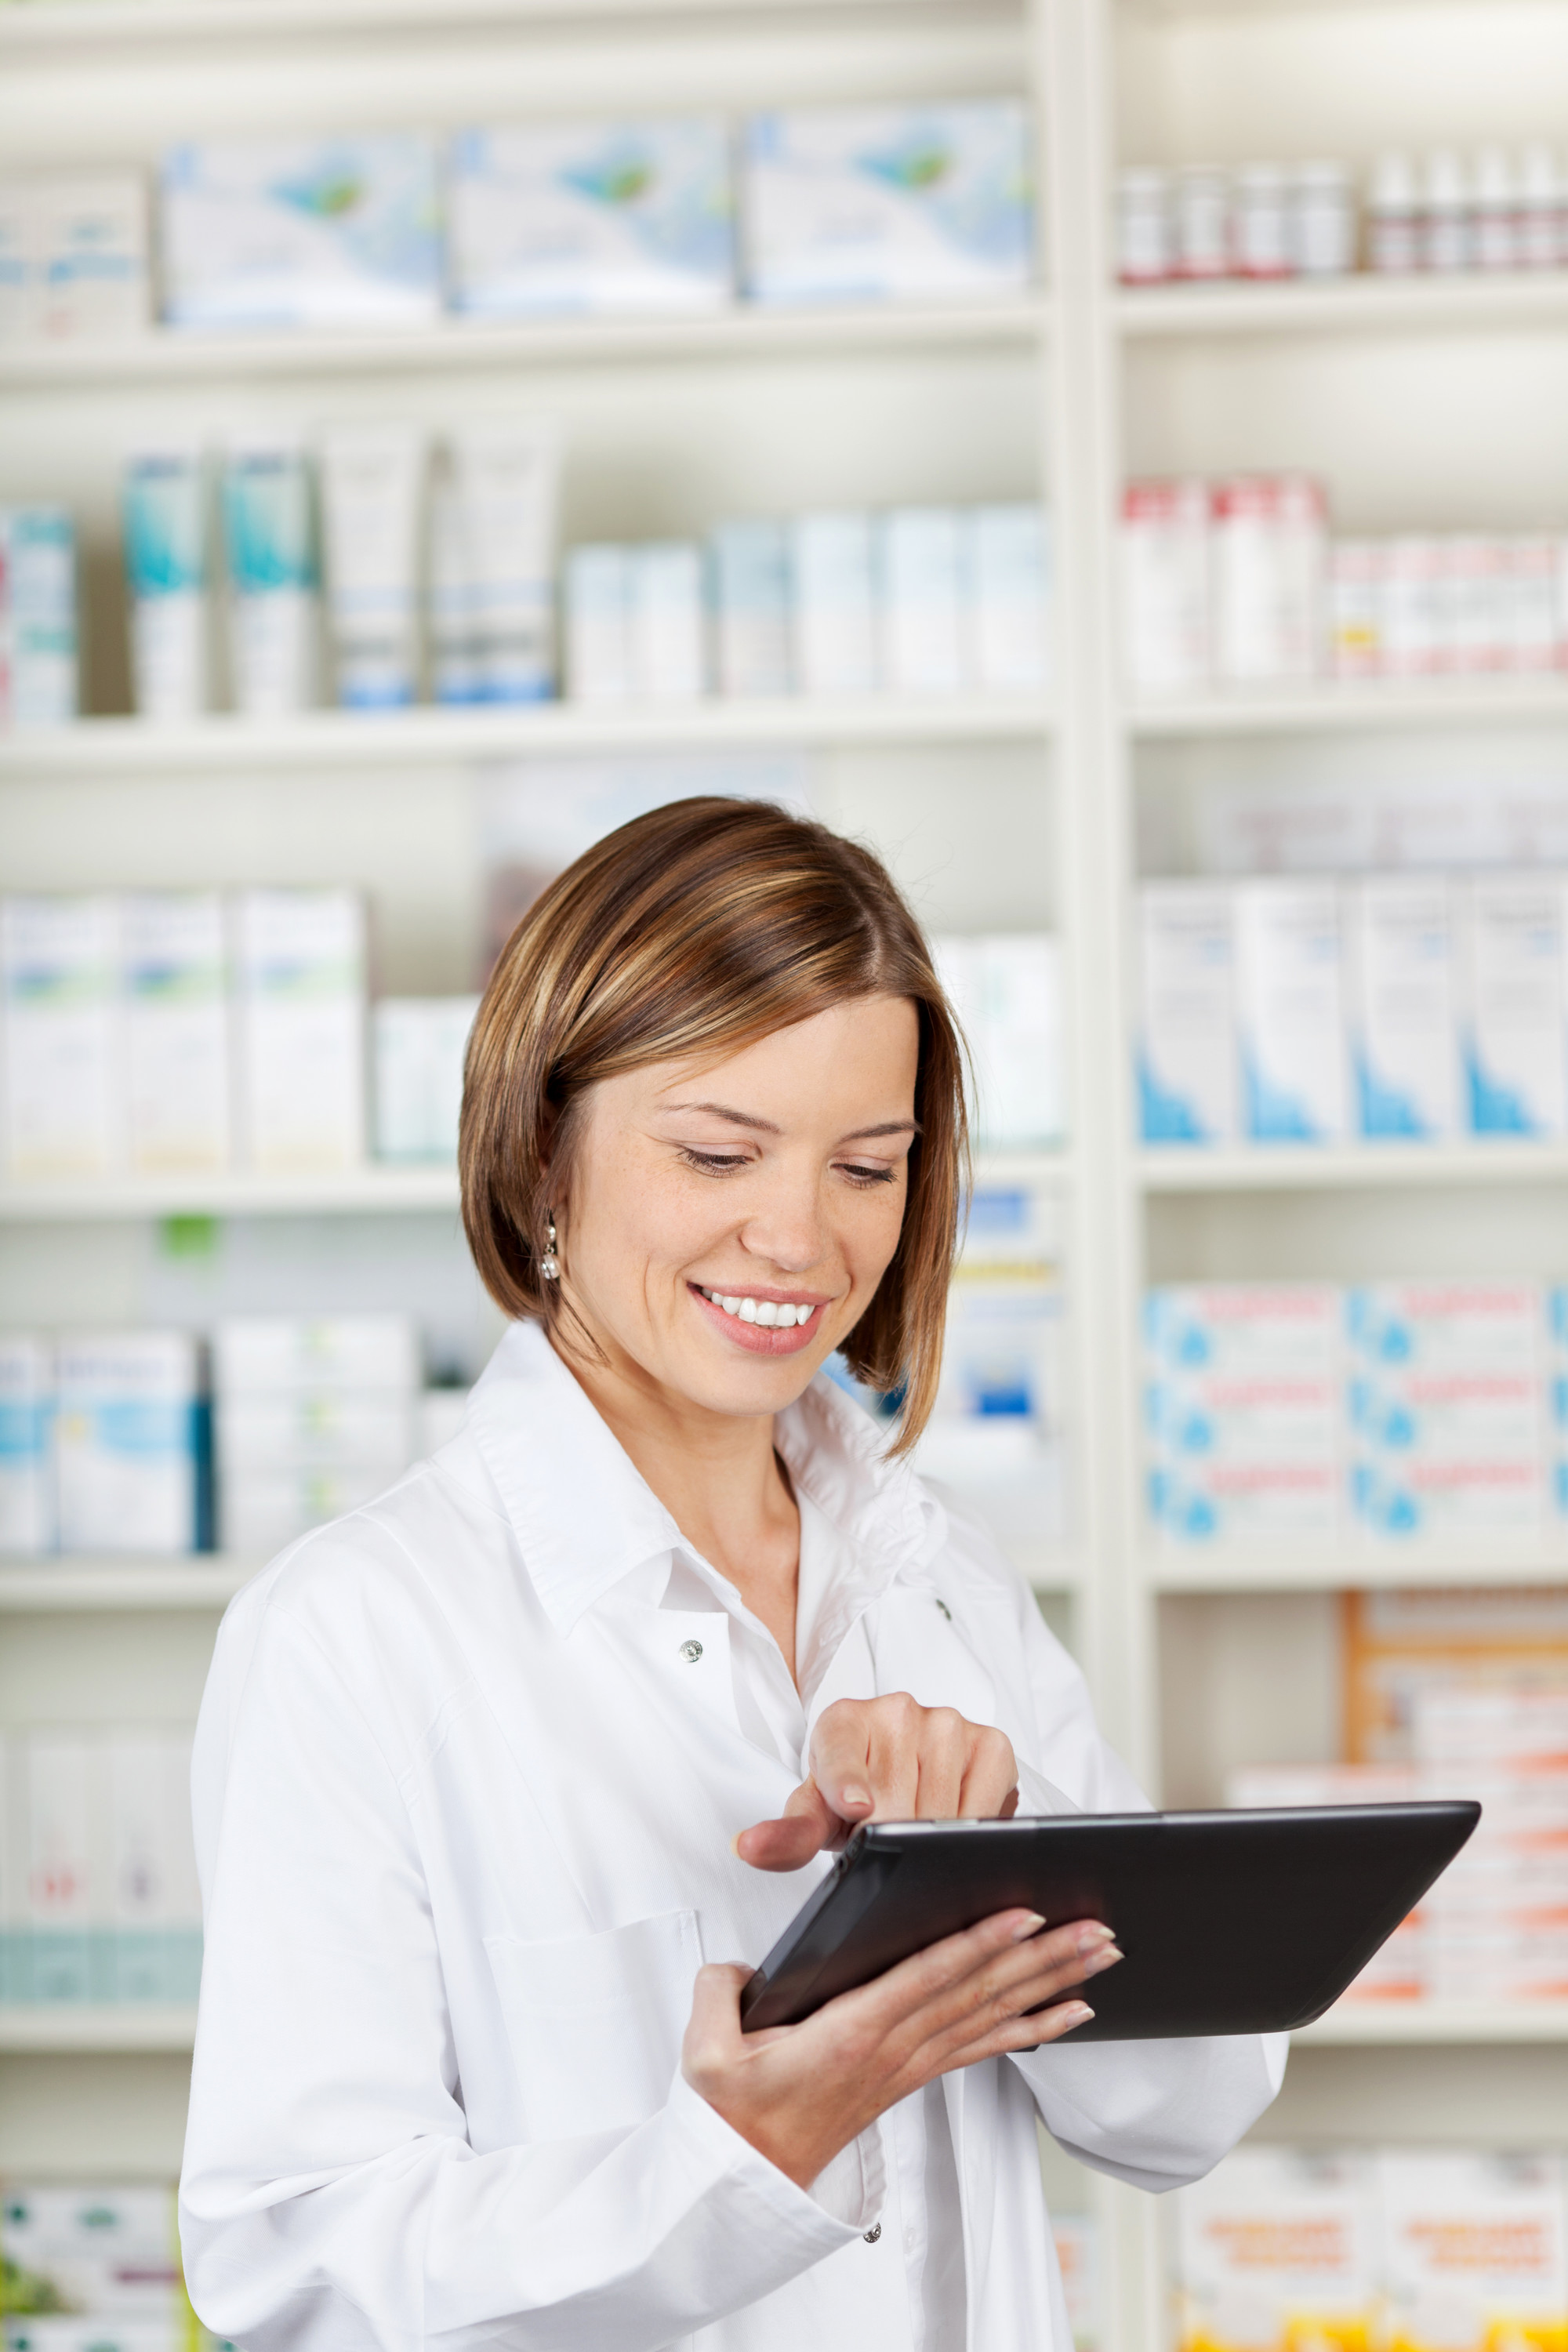 PharmaChoice Canada enters an Agreement with Infoway to offer PrescribeIT to Its Network of Independent Pharmacies